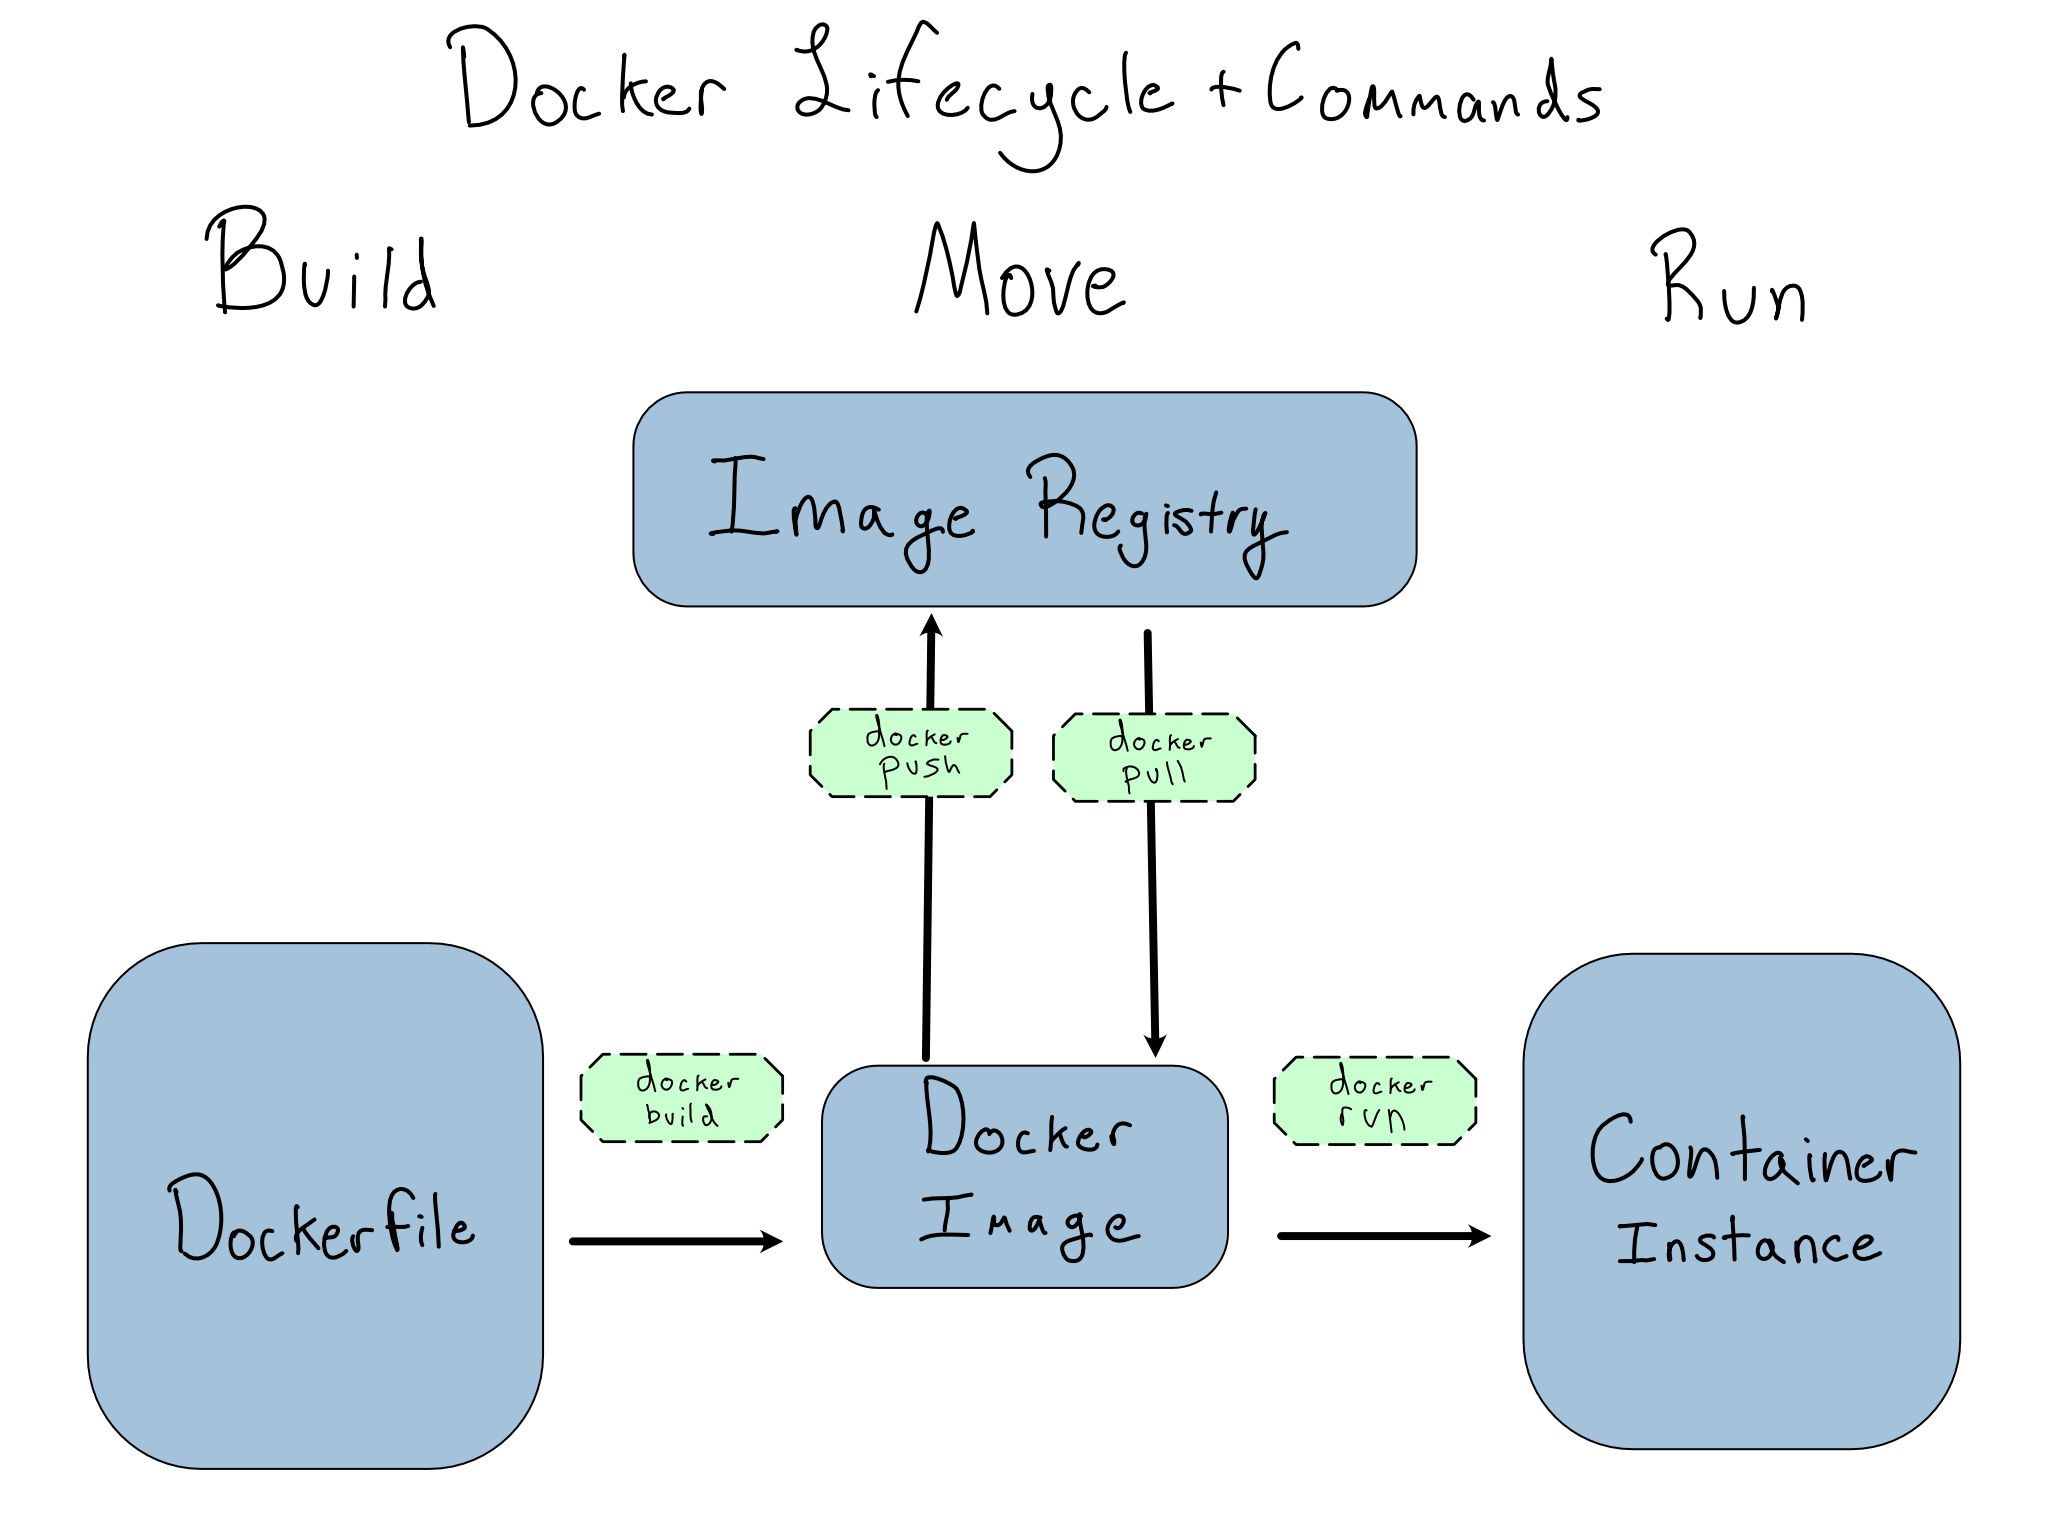 A diagram. A dockerfile turns into a Docker Image with docker build. The image can push or pull to or from an image registry. The image can run as a container instance.